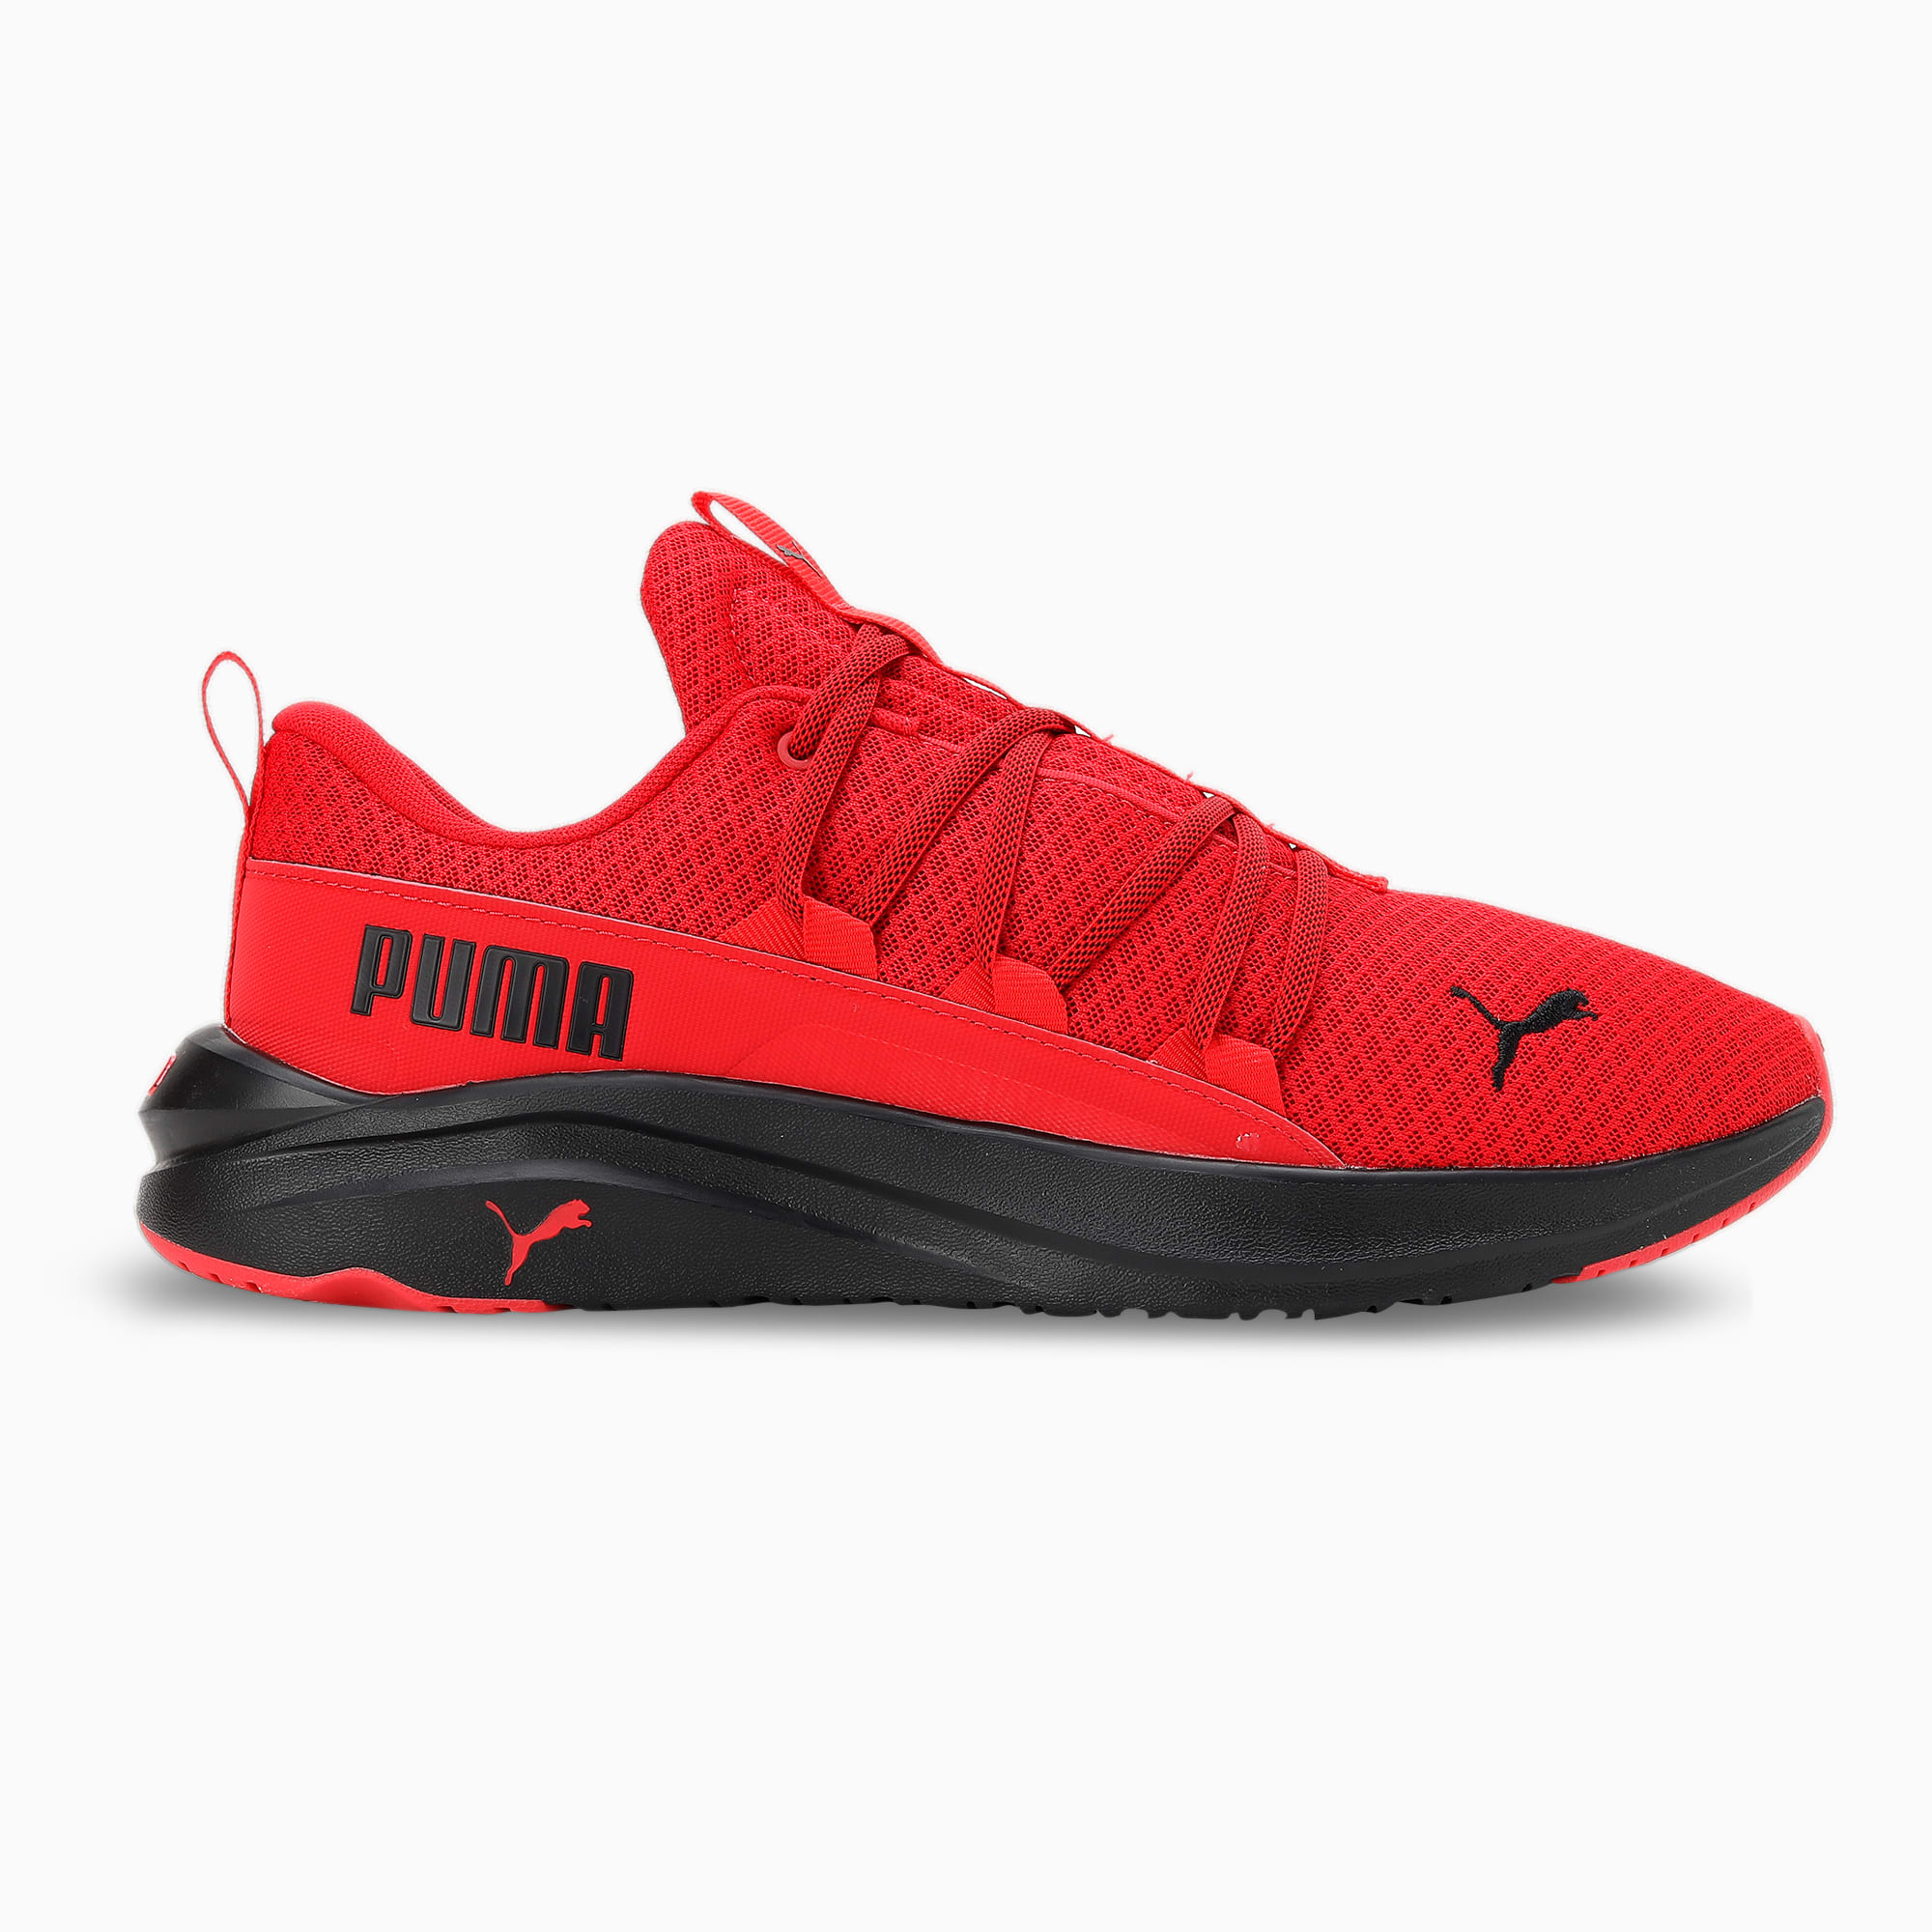 PUMA Softride One4All Running Shoes Men Sneakers, High Risk Red/Black, Size 39, Shoes